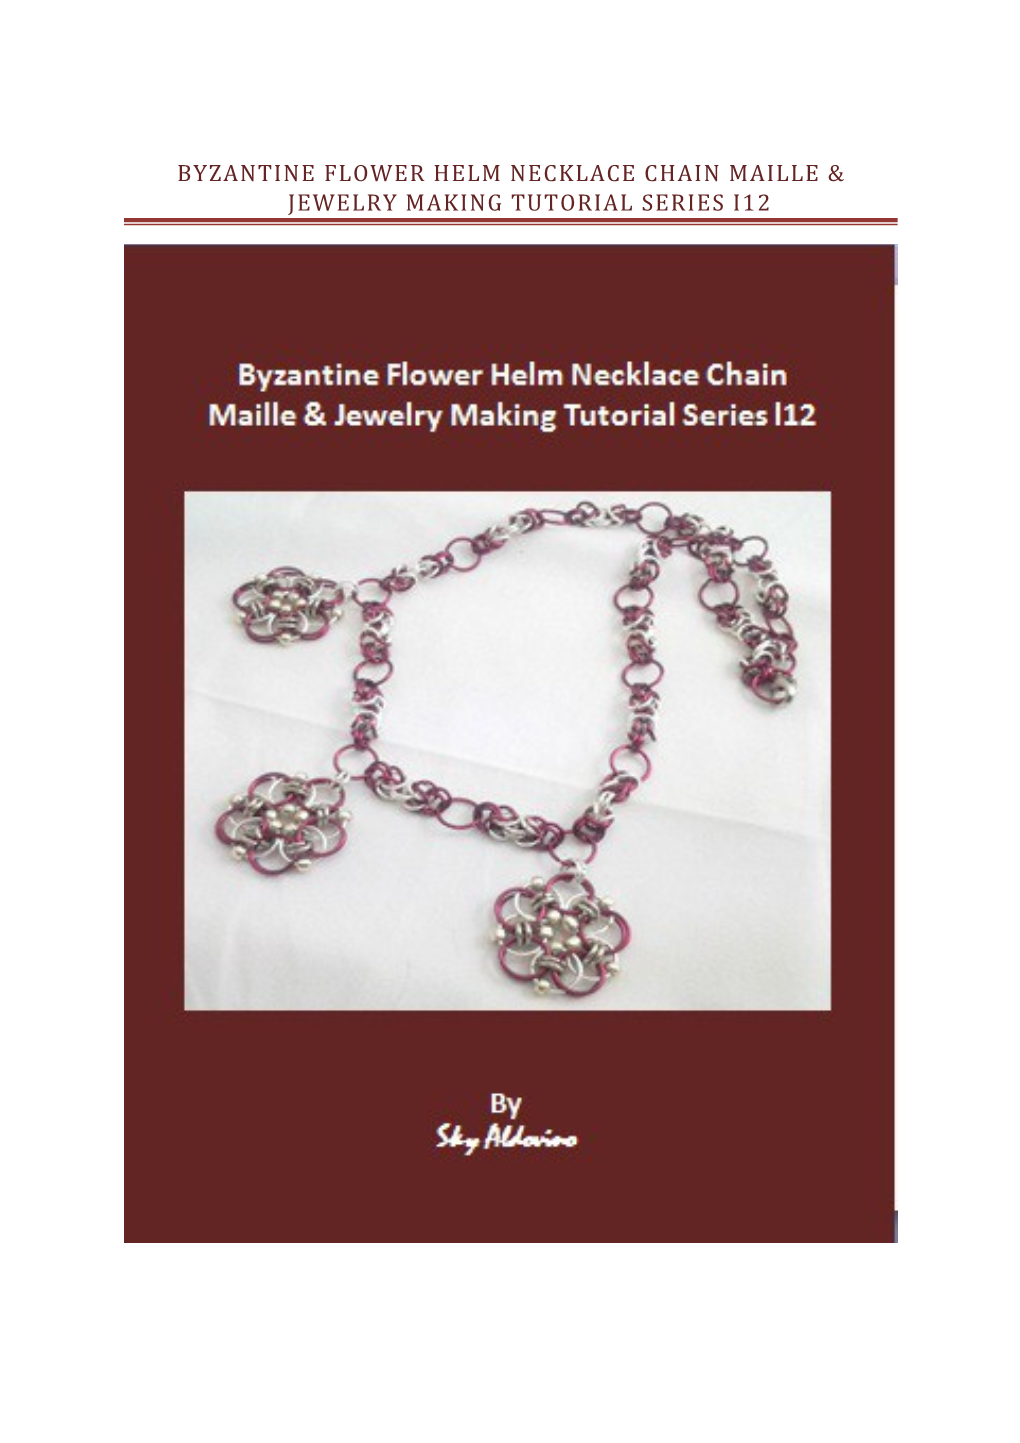 BYZANTINE FLOWER HELM NECKLACE CHAIN MAILLE & Jewelry Making Tutorial Series I12